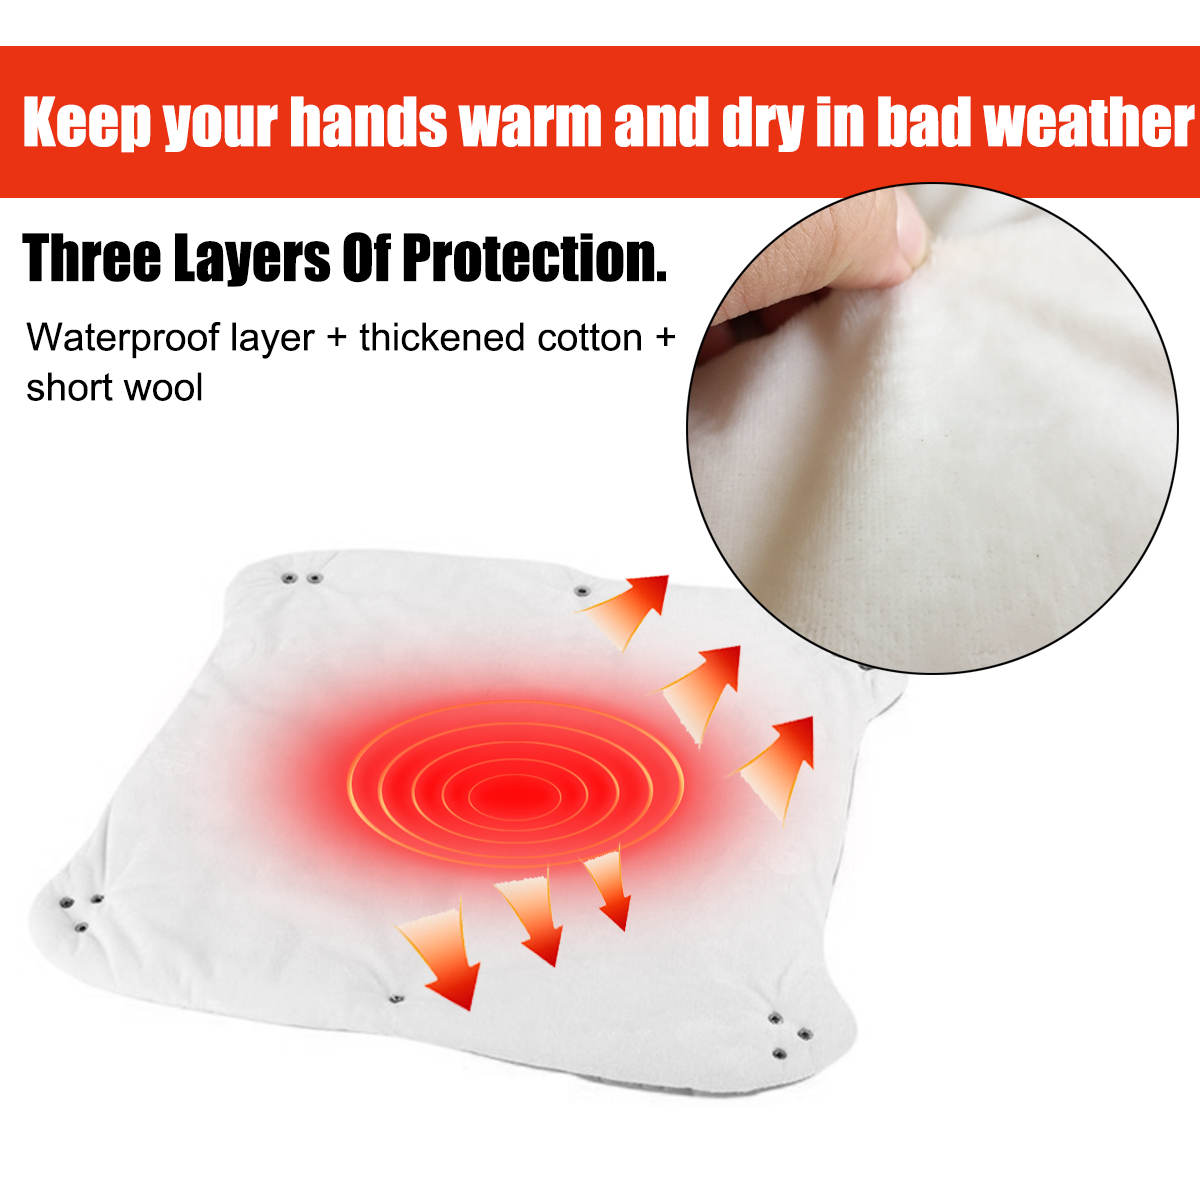 Baby-Stroller-Waterproof-Anti-freeze-Gloves-Winter-Pushchair-Warmer-Hand-Cover-Outdoor-Hiking-Travel-1698150-2